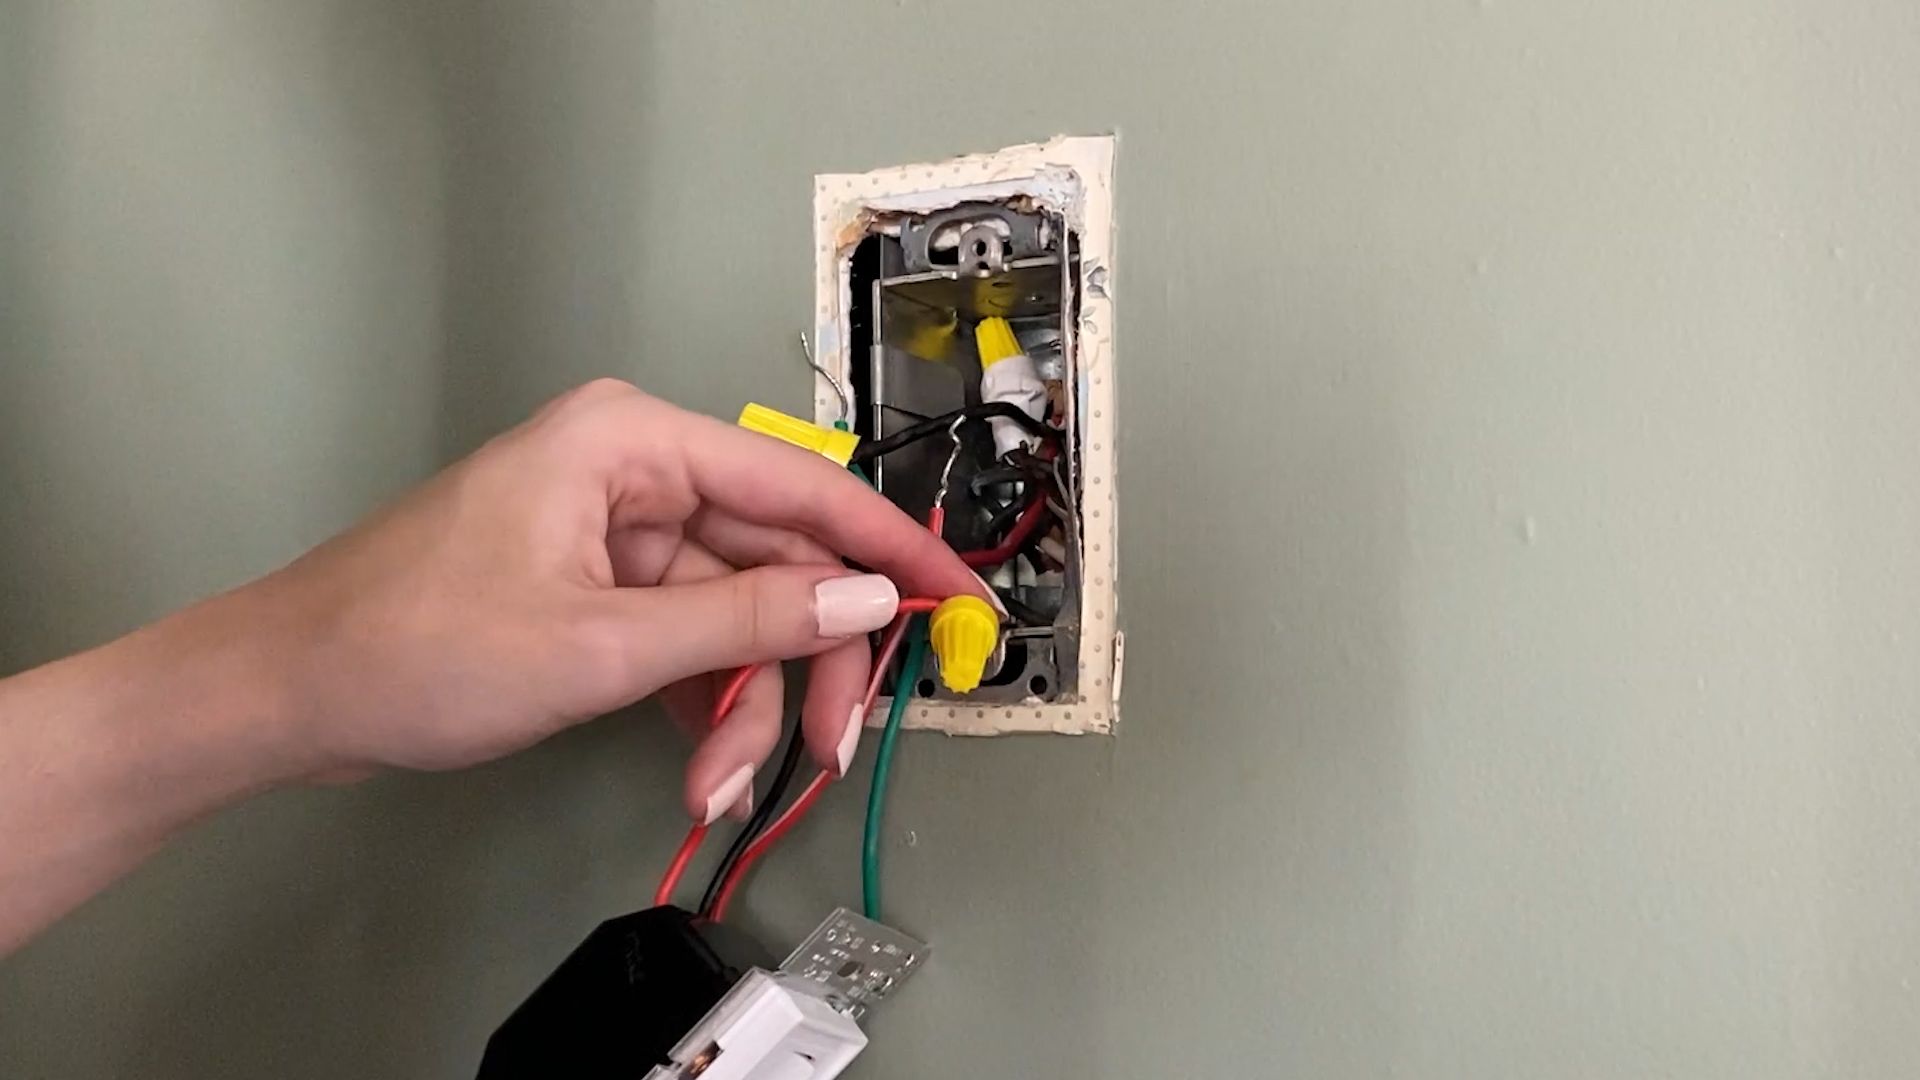 How To Install A Dimmer Switch Wiring Single Pole And 3 Way Lights